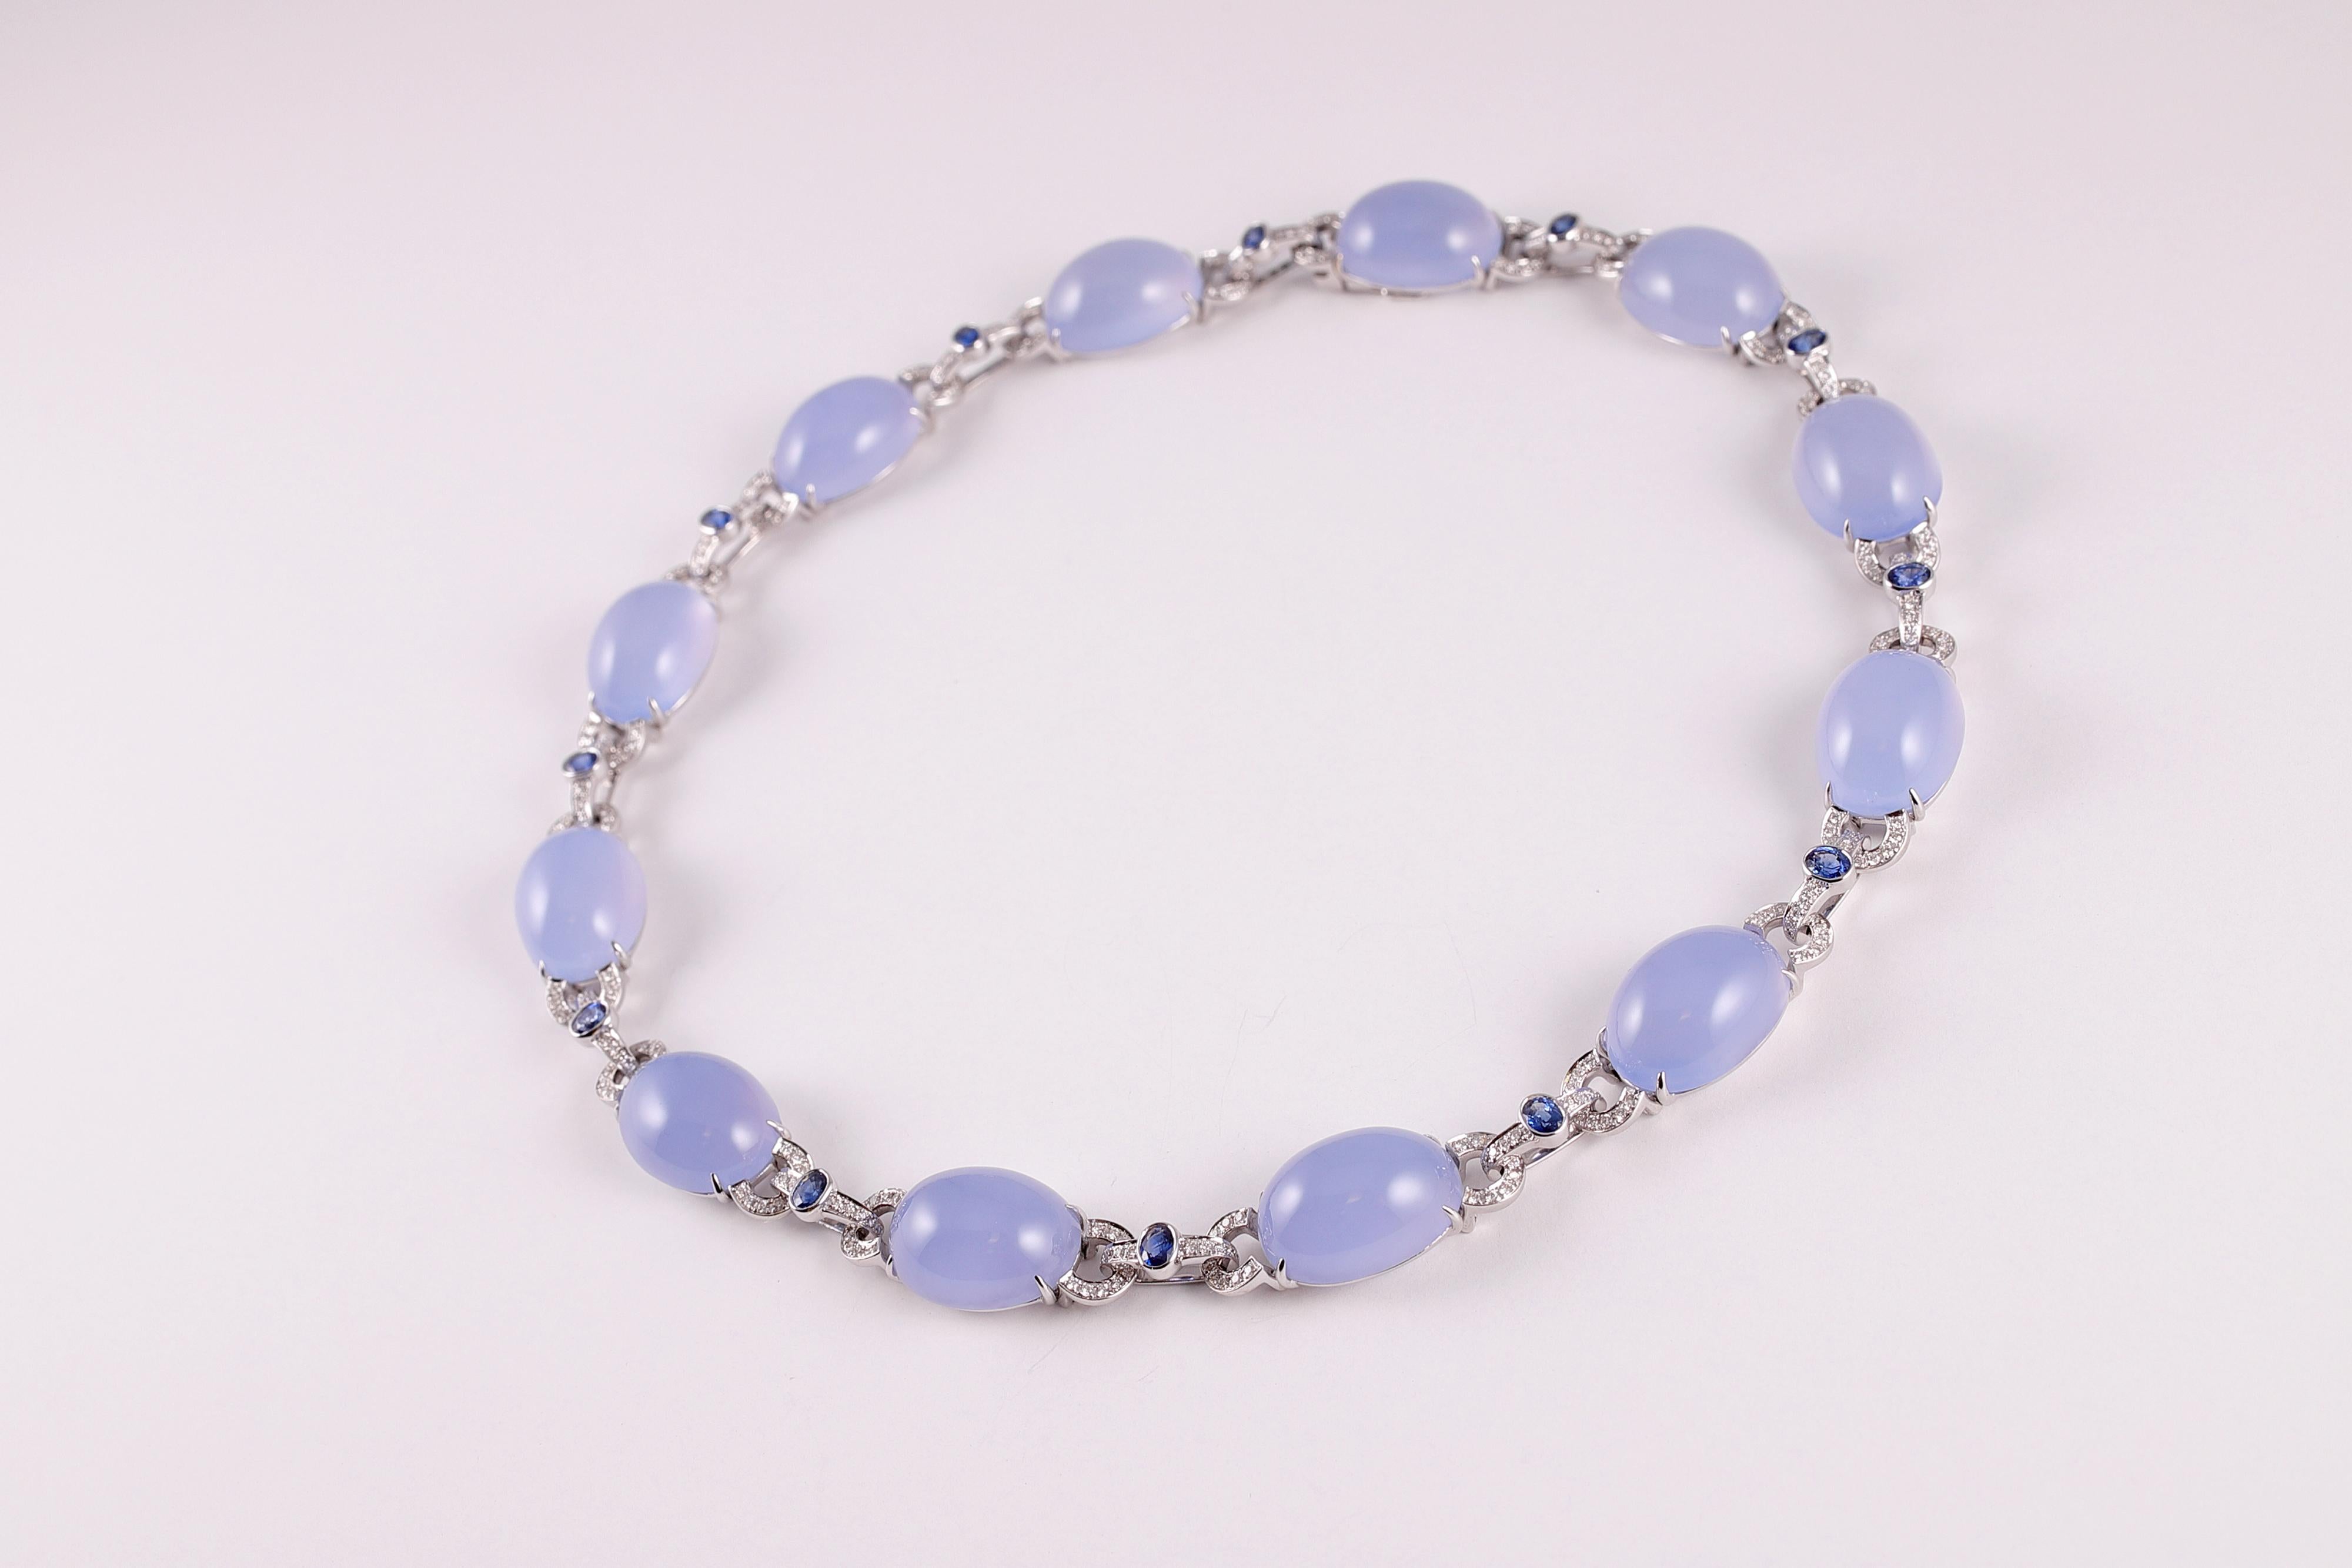 Purchased from famed London jewelry designer David Morris, this elegant necklace is composed of 18 karat white gold and features twelve oval-shaped, cabochon-cut chalcedony stones, pave-set diamonds and blue sapphires.  The diamonds are stated to be